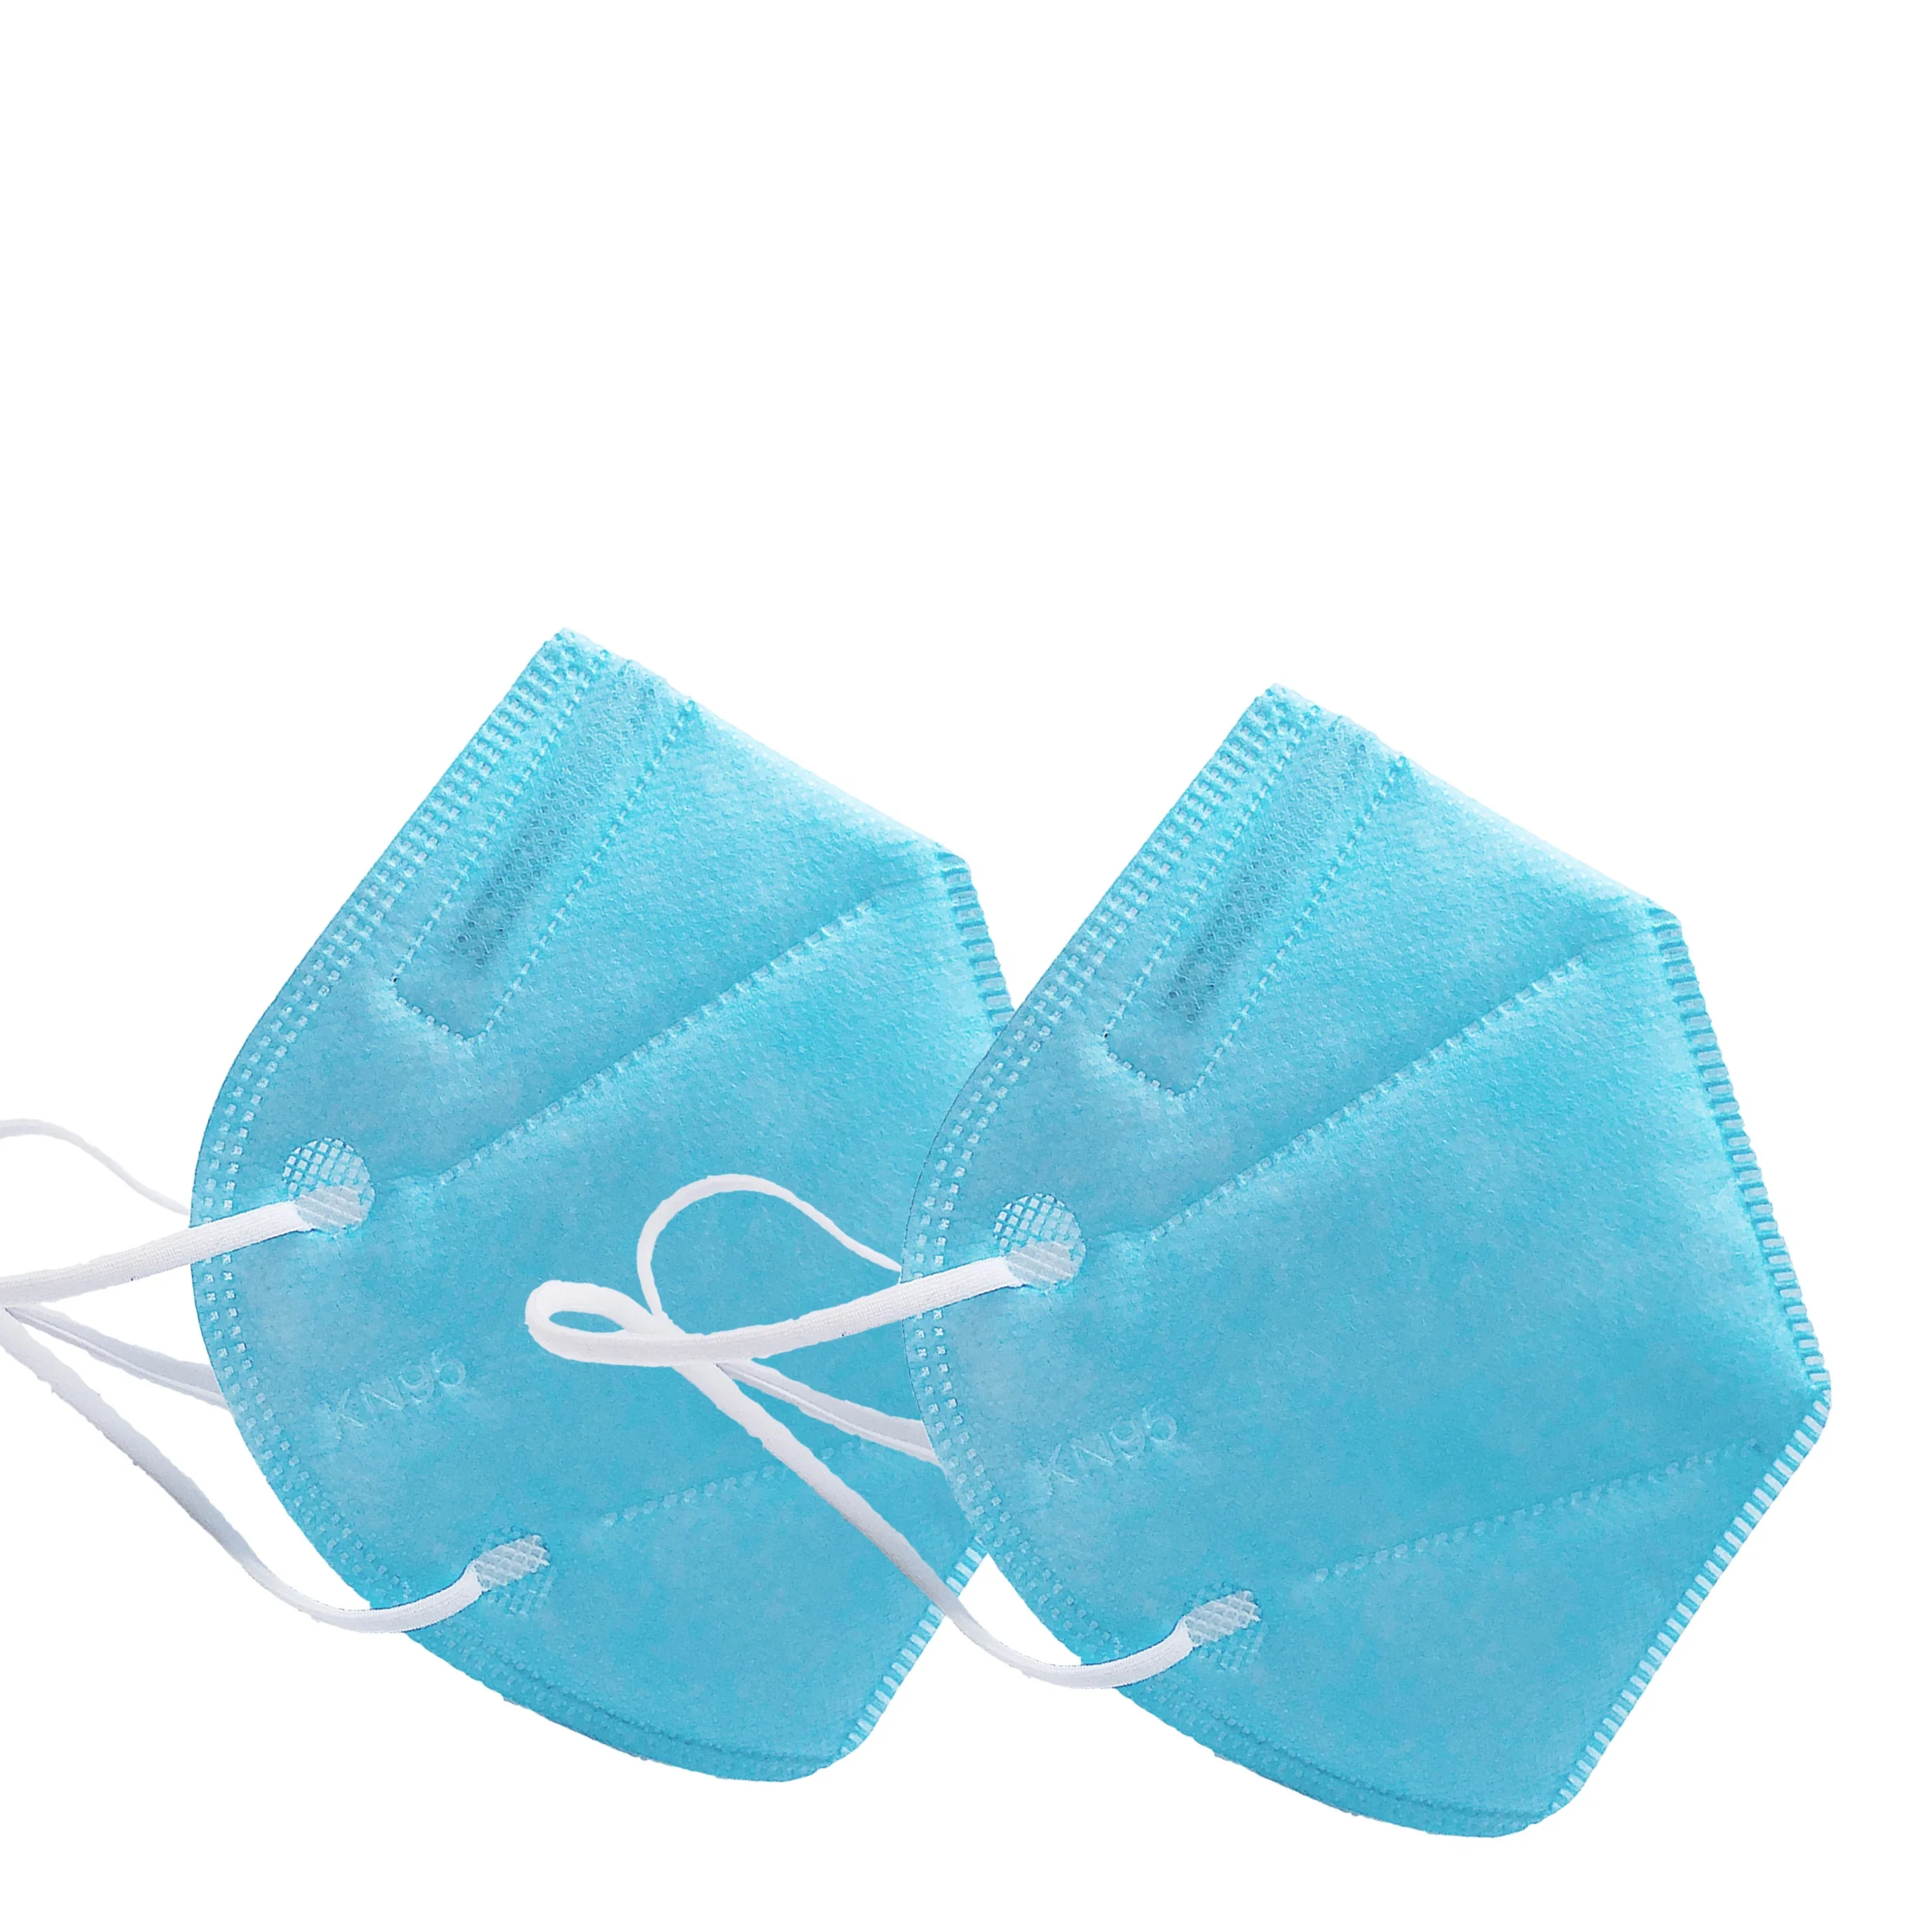 
Fashion Dust Anti Pollution Printed 5 Ply Face Disposable Mouth Mask KN95 Ear Earloop In Stock 